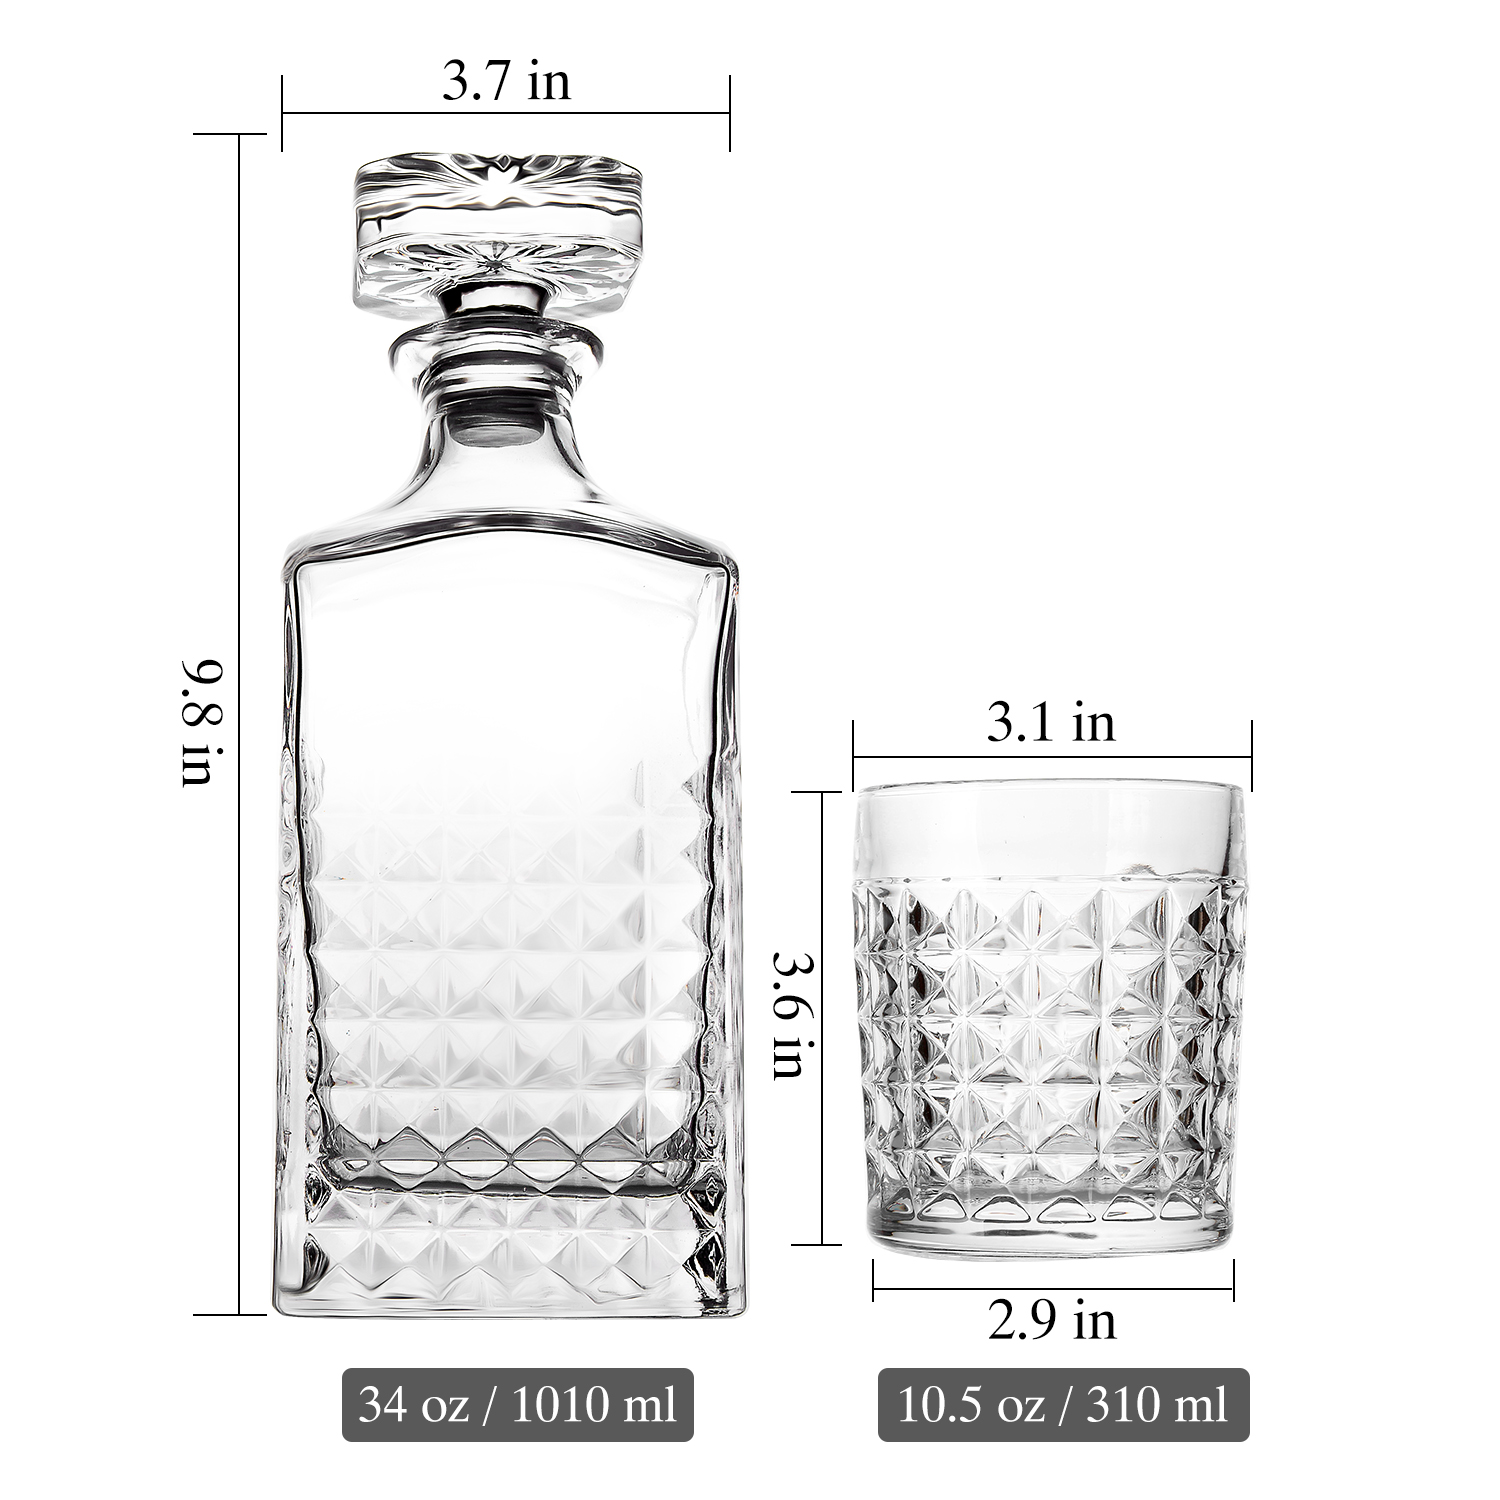 Lighten Life Whisky Decanter Sets,Italian Style Decanter with 4 Glasses Set in Gift Box,Crystal Glass Decanter Set for Bourbon,Scotch,Liquor,Whiskey Decanter Sets for Men and Women - image 2 of 6